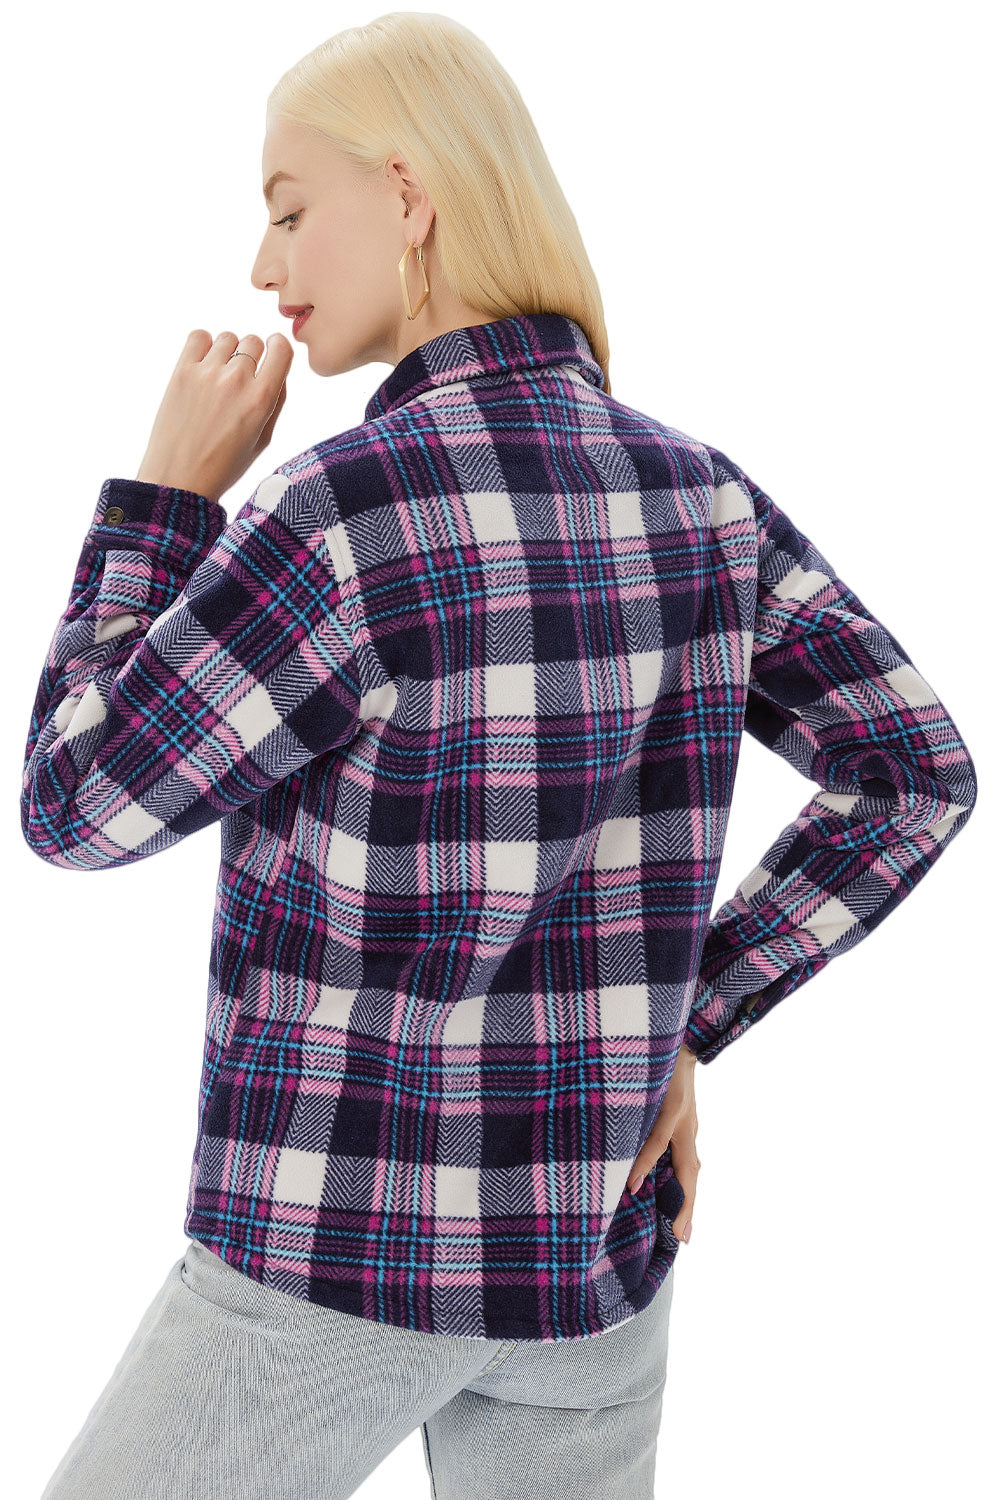 Women's Sherpa Lined Throughout Shirt Jacket Button Up Plaid Jacket